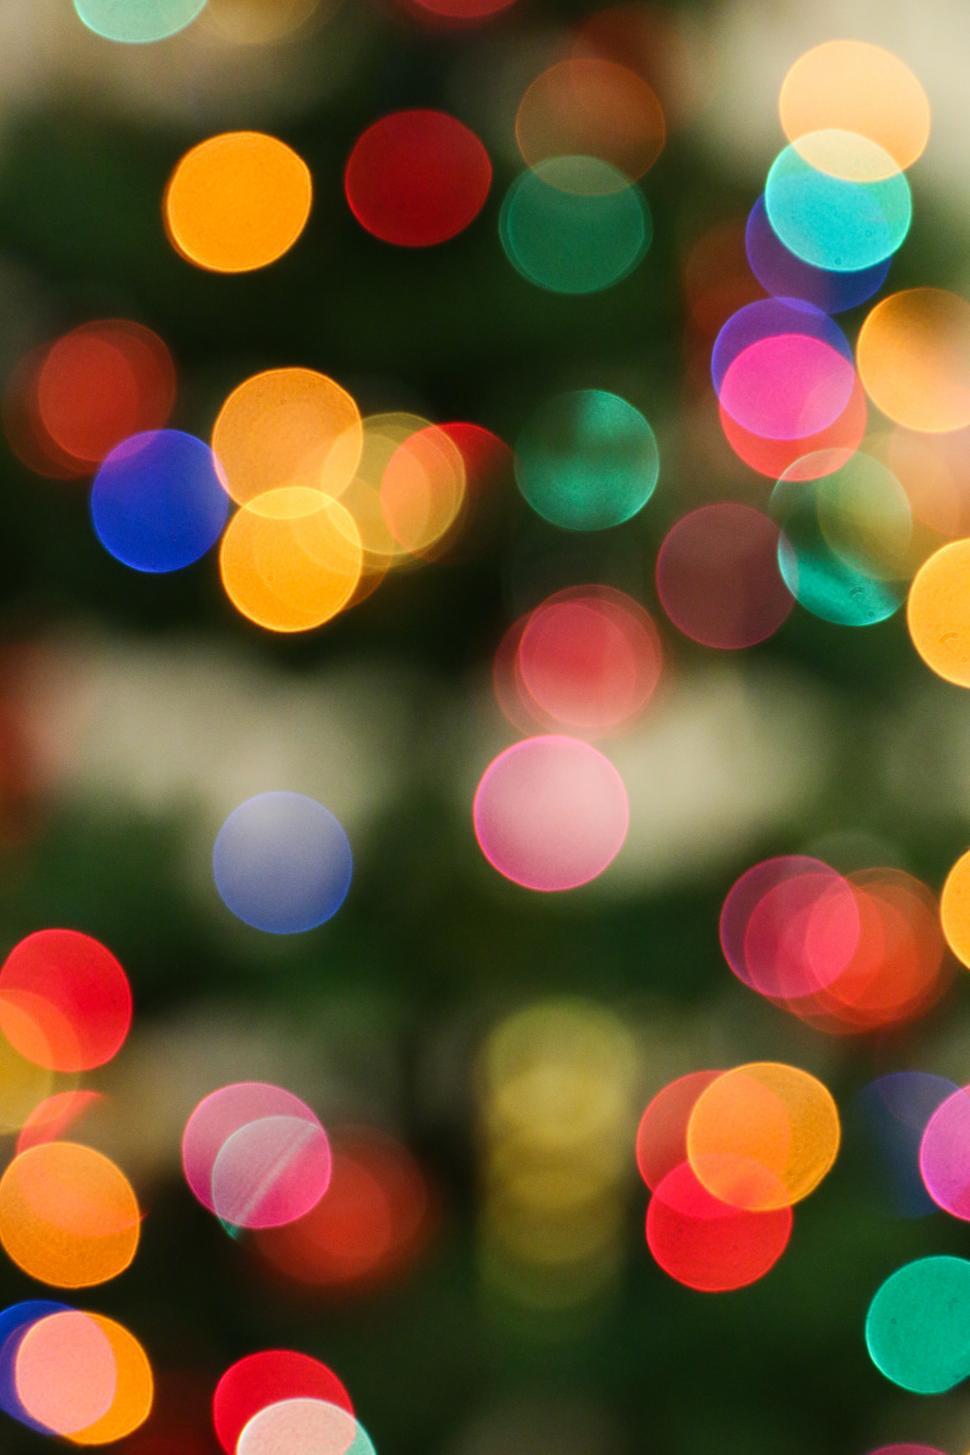 Free Image of Colorful Lights 